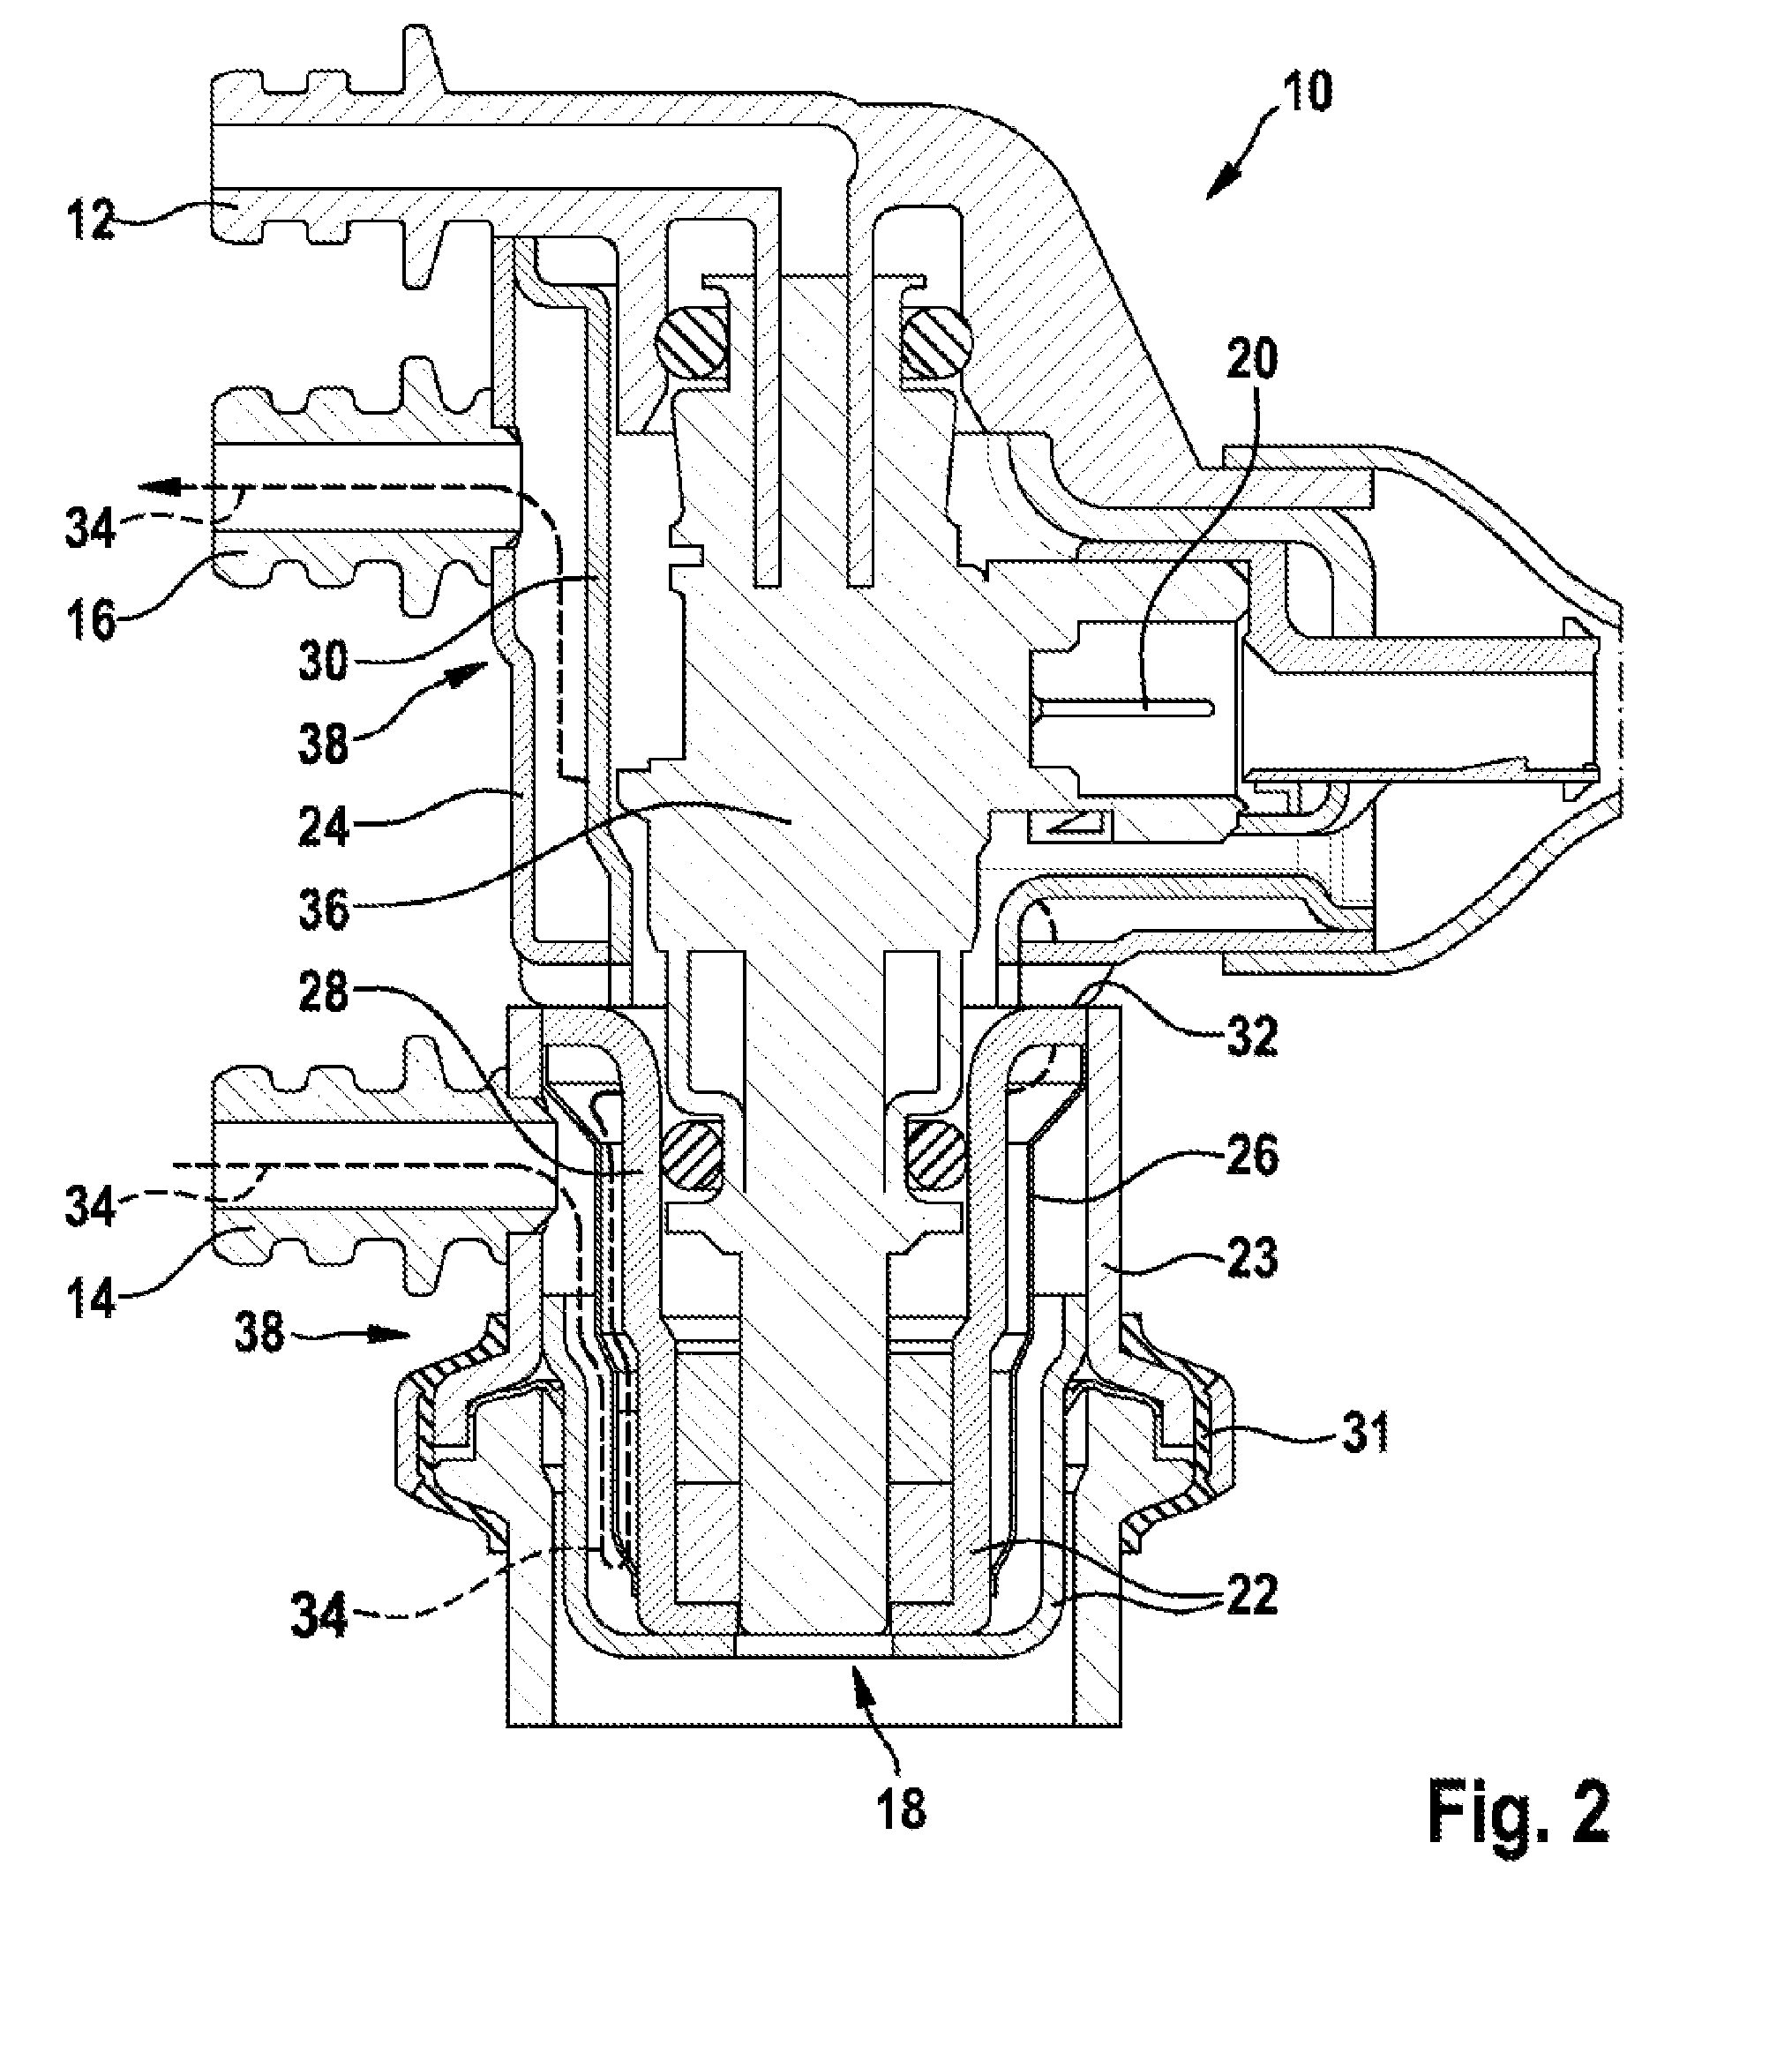 Water-cooled dosing module